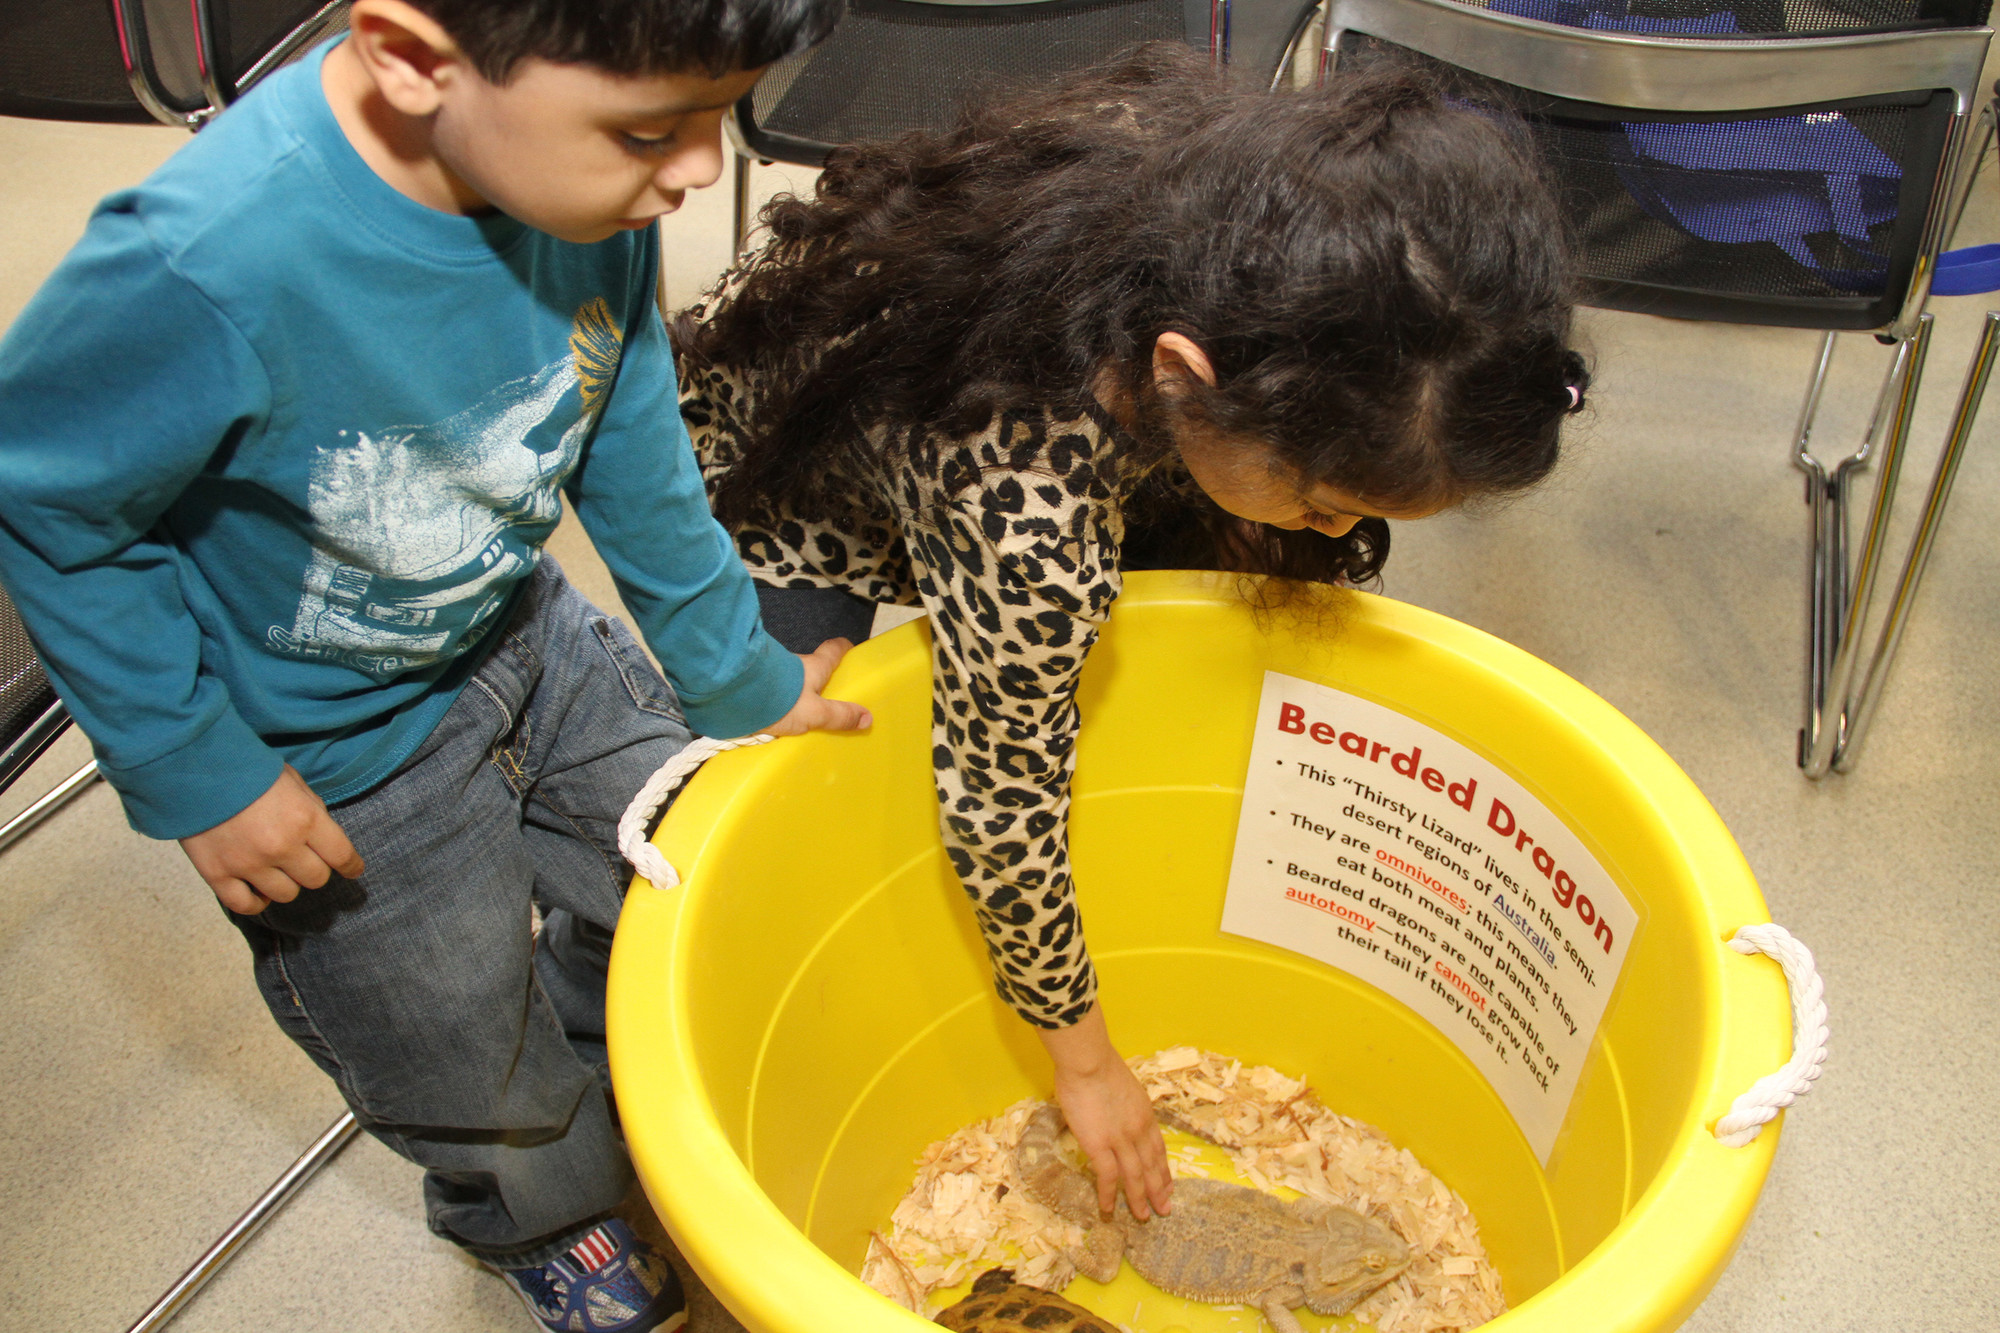 Amelia Reyes bravely reached in to pet a bearded dragon, while her brother Joseph watched.